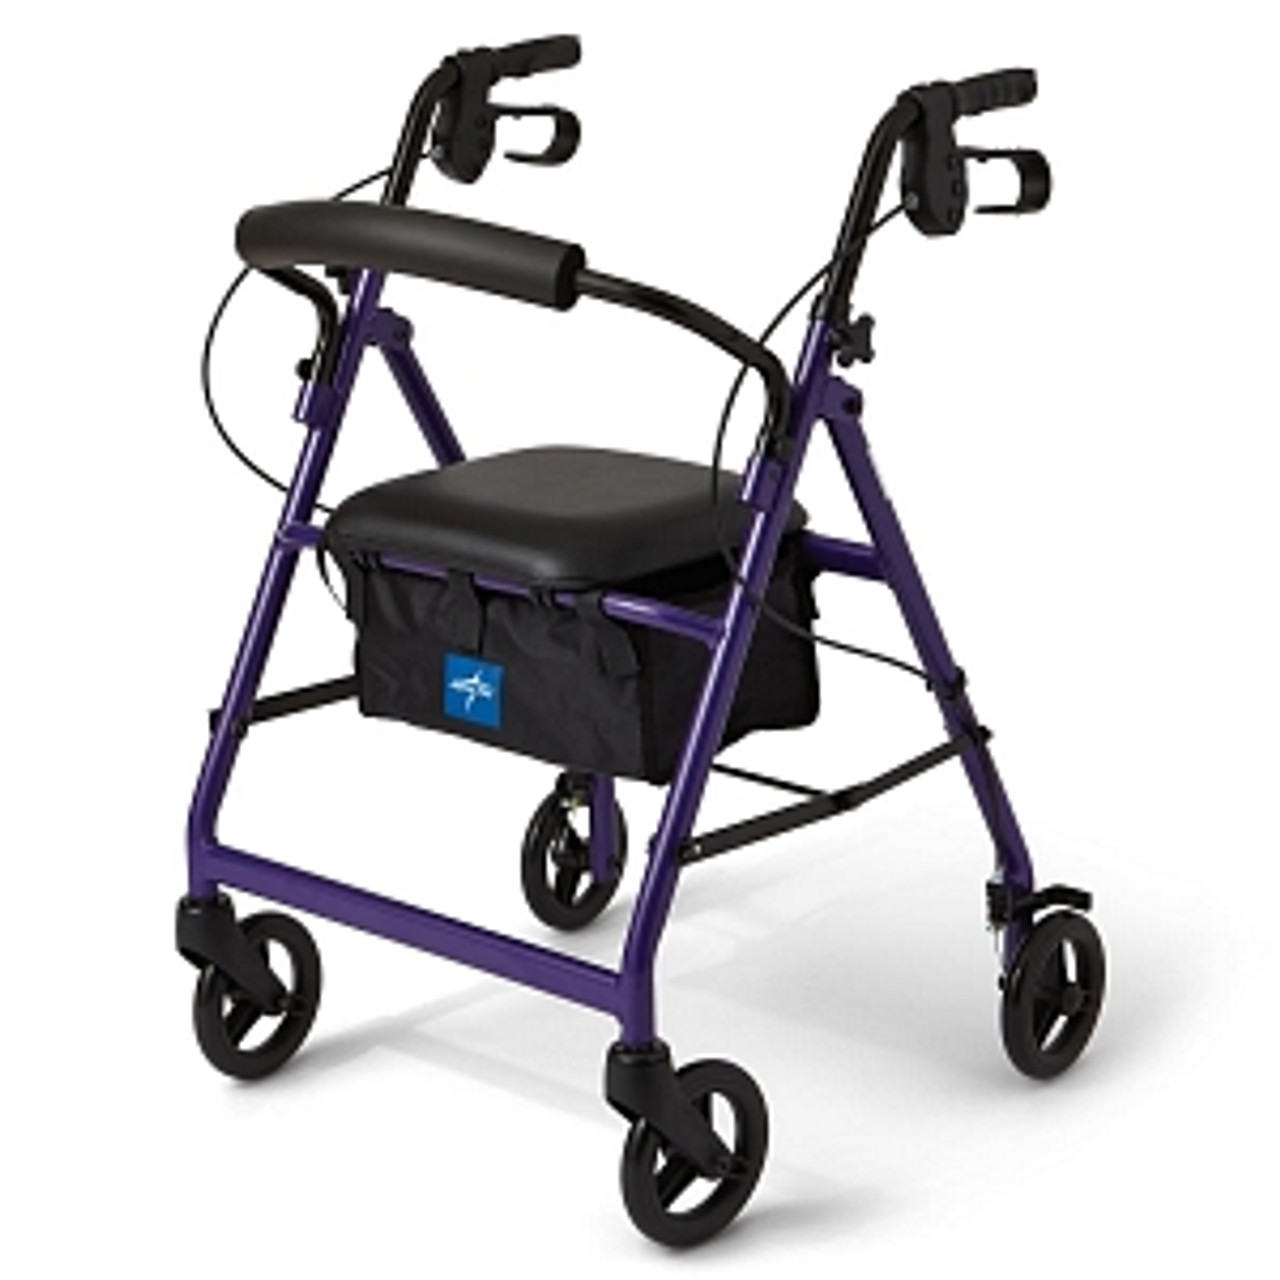 Easy-to-use loop-style brakes; push down to lock, pull up to release
Padded backrest and seat for comfortable resting
Height-adjustable arms for a custom fit
Folding design for compact storage